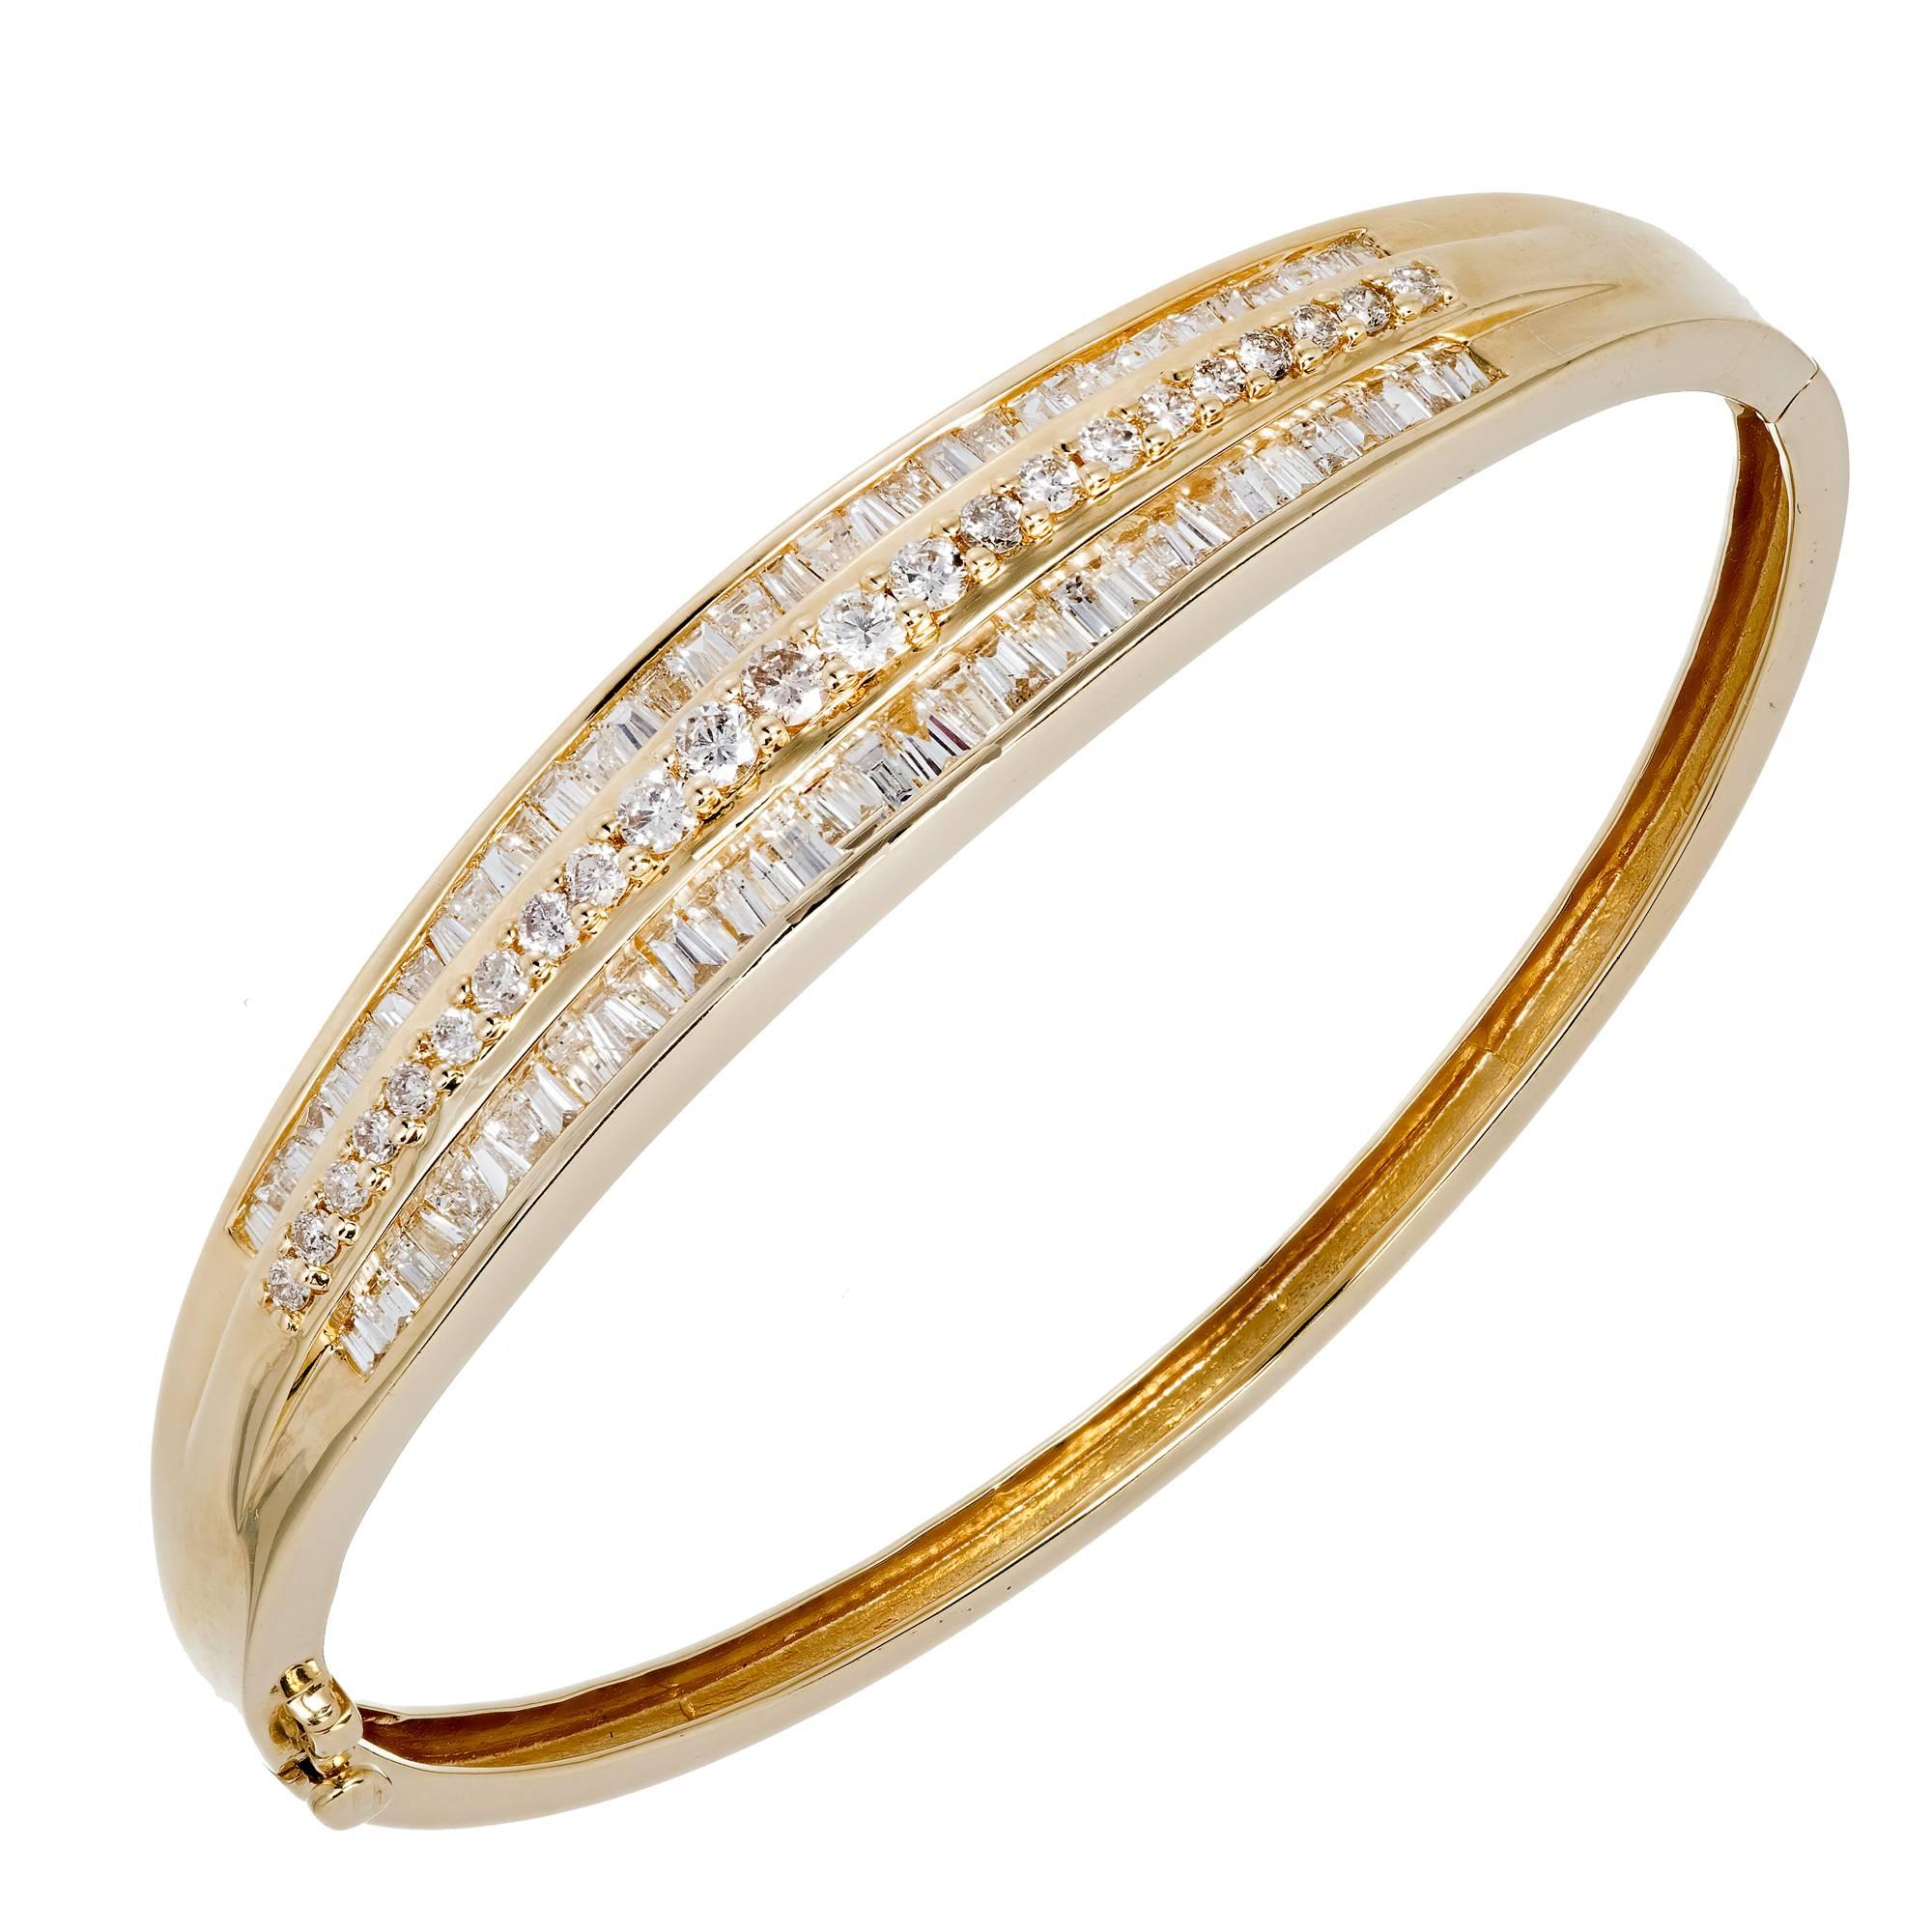 Fine diamond 3 row baguette and round diamond hinged 14 karat bangle bracelet. Underside safety. 

66 baguette cut diamonds, approx. total weight 1.20cts, H, VS-SI
23 round diamonds, approx. total weight .46cts, H, VS
14k Yellow gold
18.6